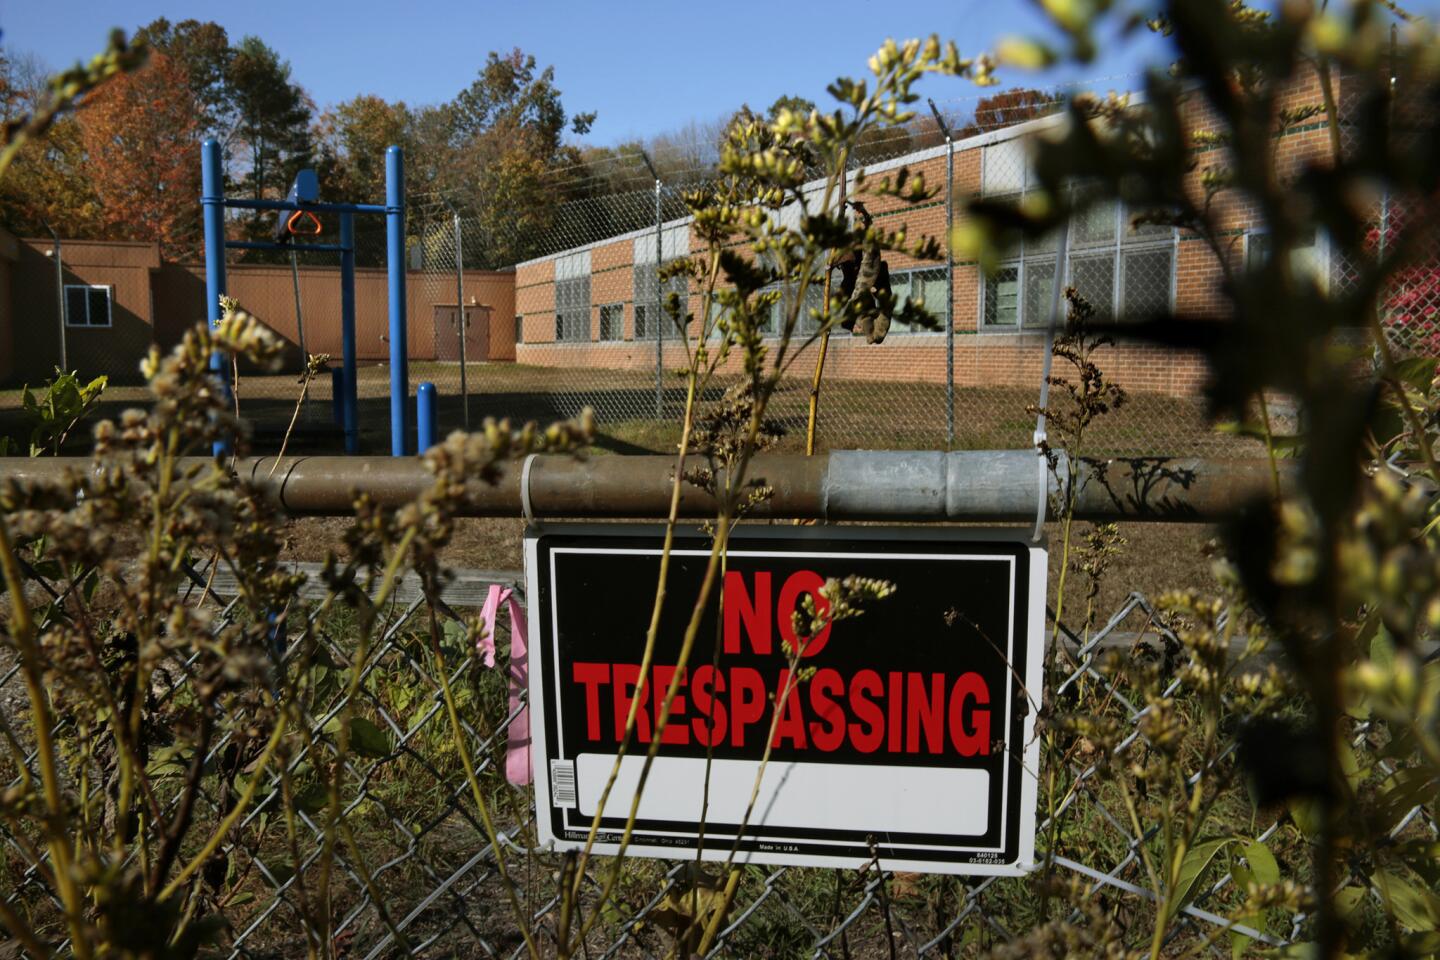 Sandy Hook Elementary School in Newtown, Conn., is scheduled to be torn down to make way for a new building on the same property.